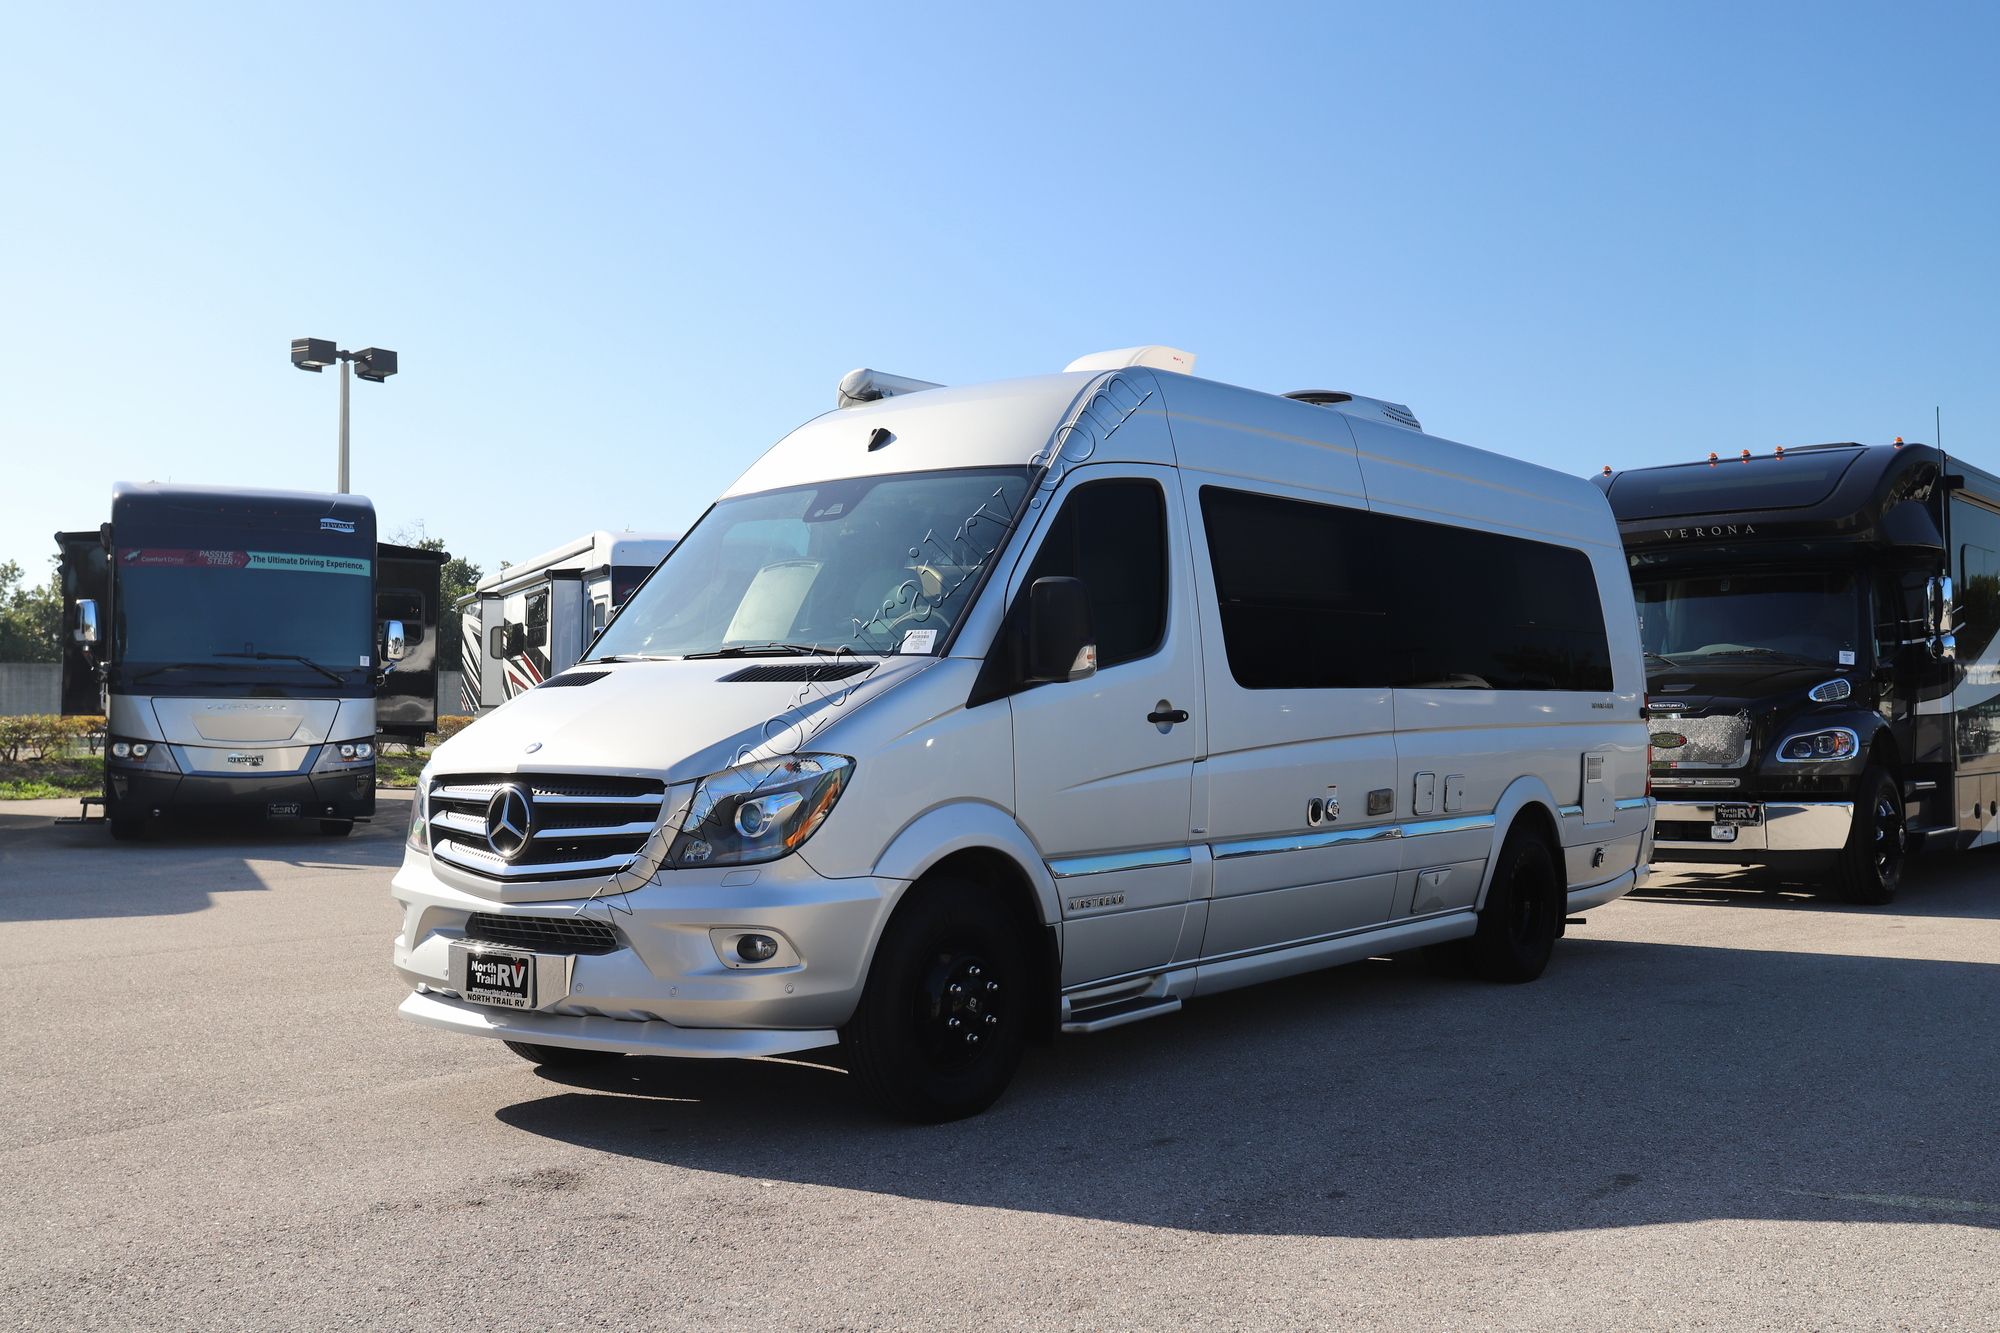 Used 2015 Airstream Interstate 24GL Class B  For Sale